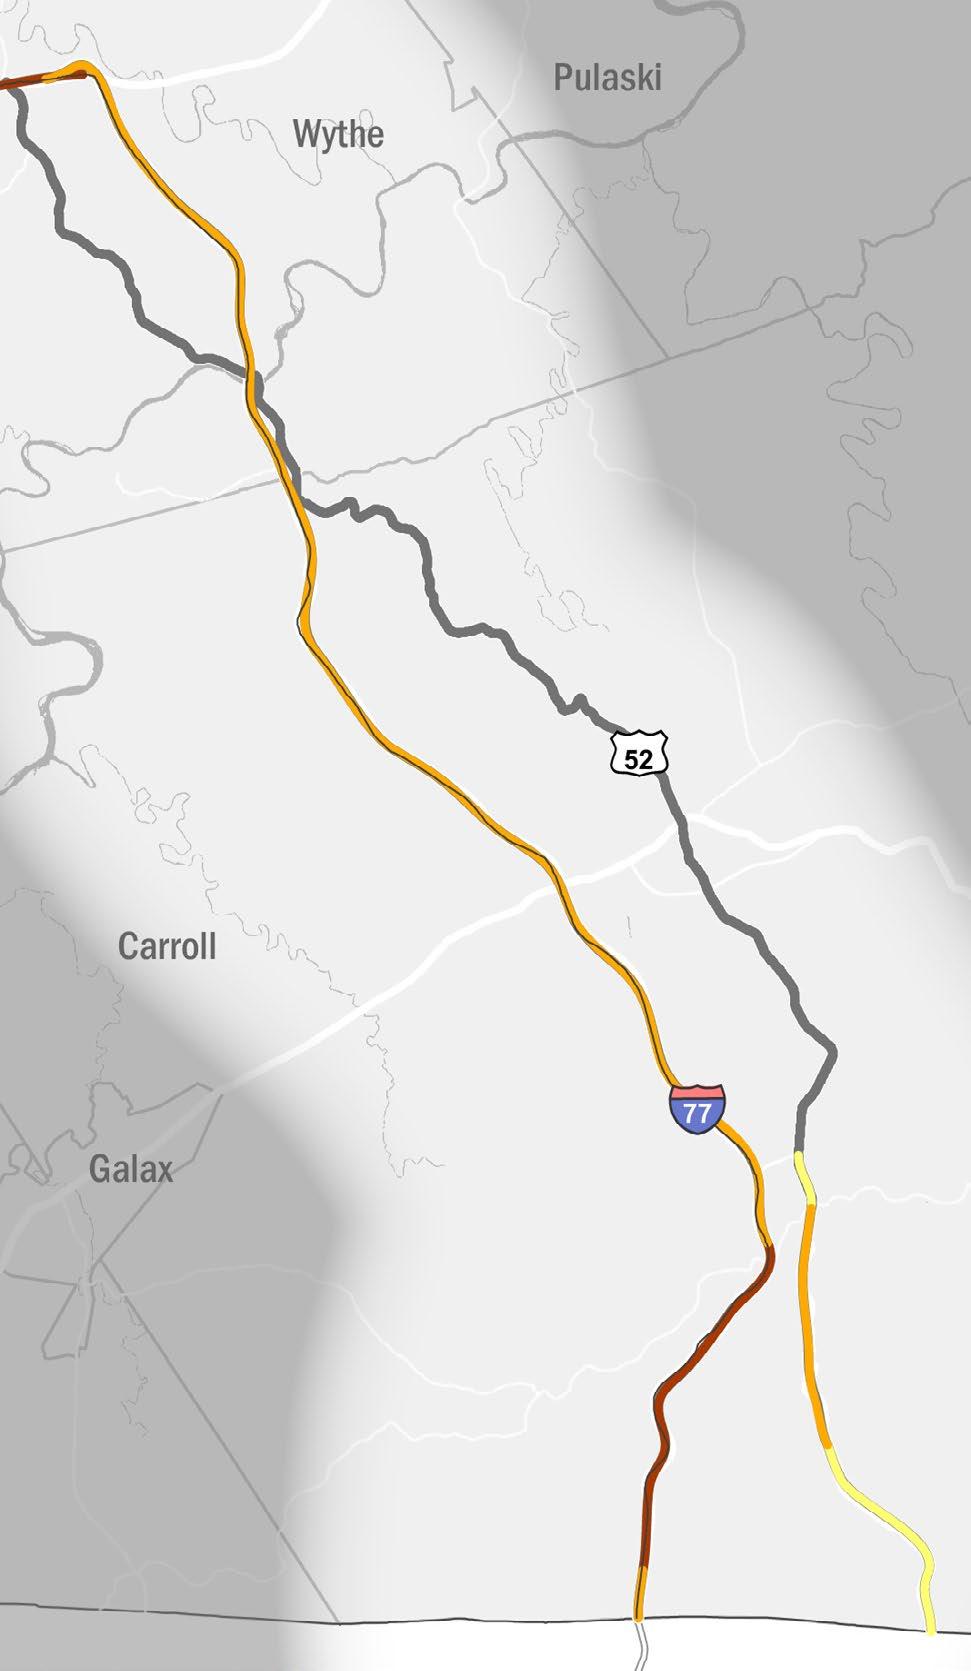 L1 SEGMENT PROFILE Segment L1 begins at the North Carolina border and progresses north to the eastern junction of Interstates I-77 and I-81, serving Carroll and Wythe Counties.